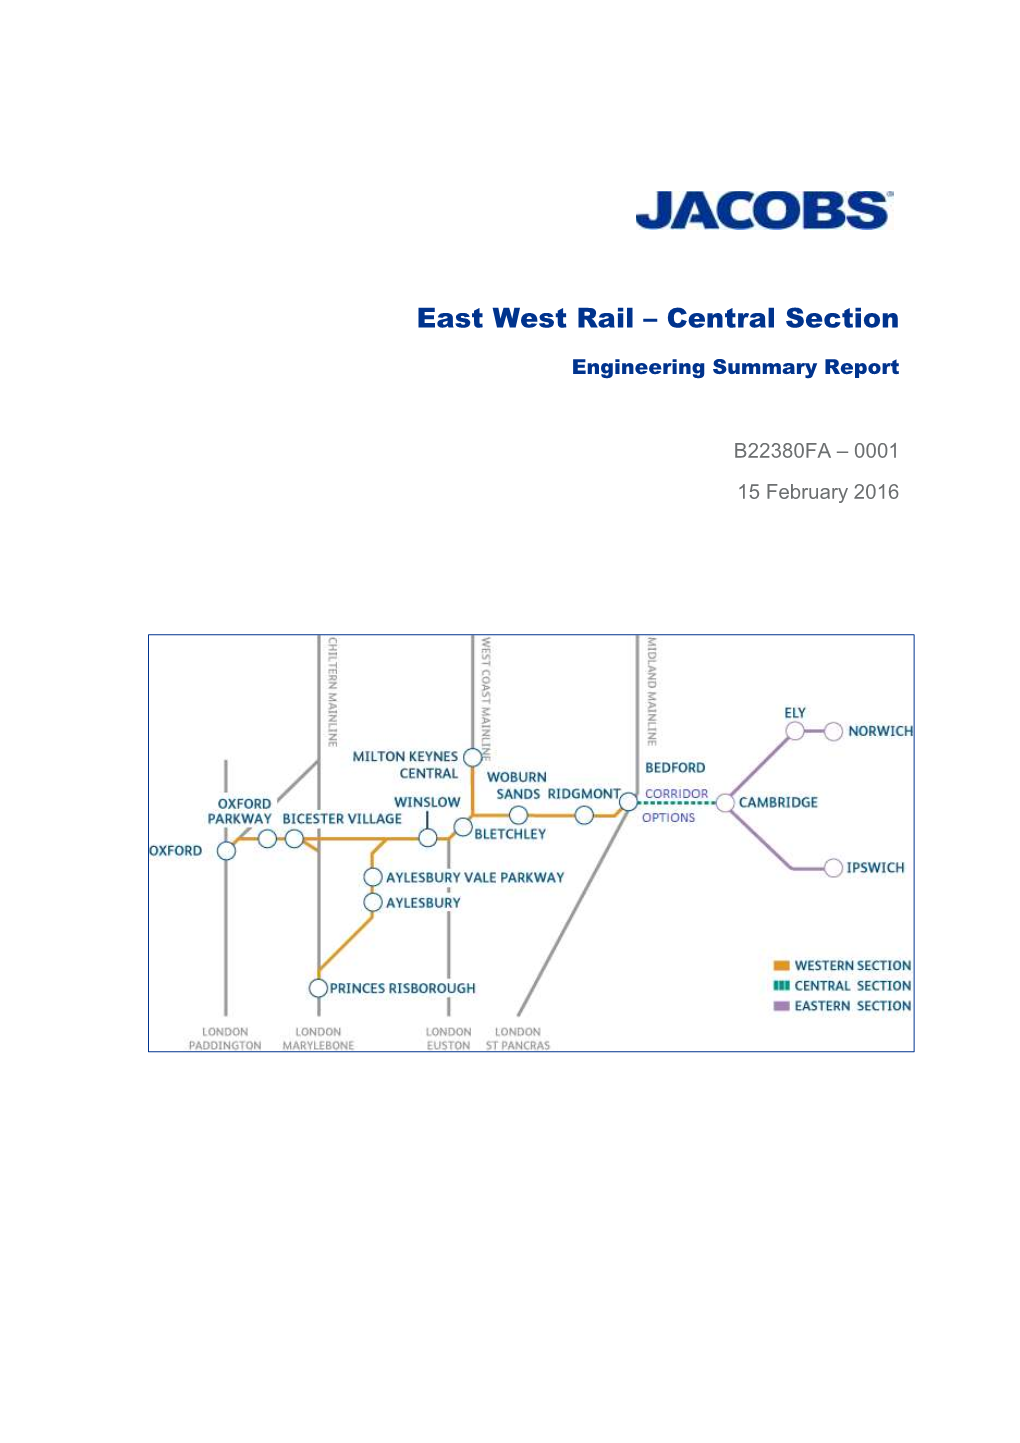 East West Rail Central Section Engineering Summary